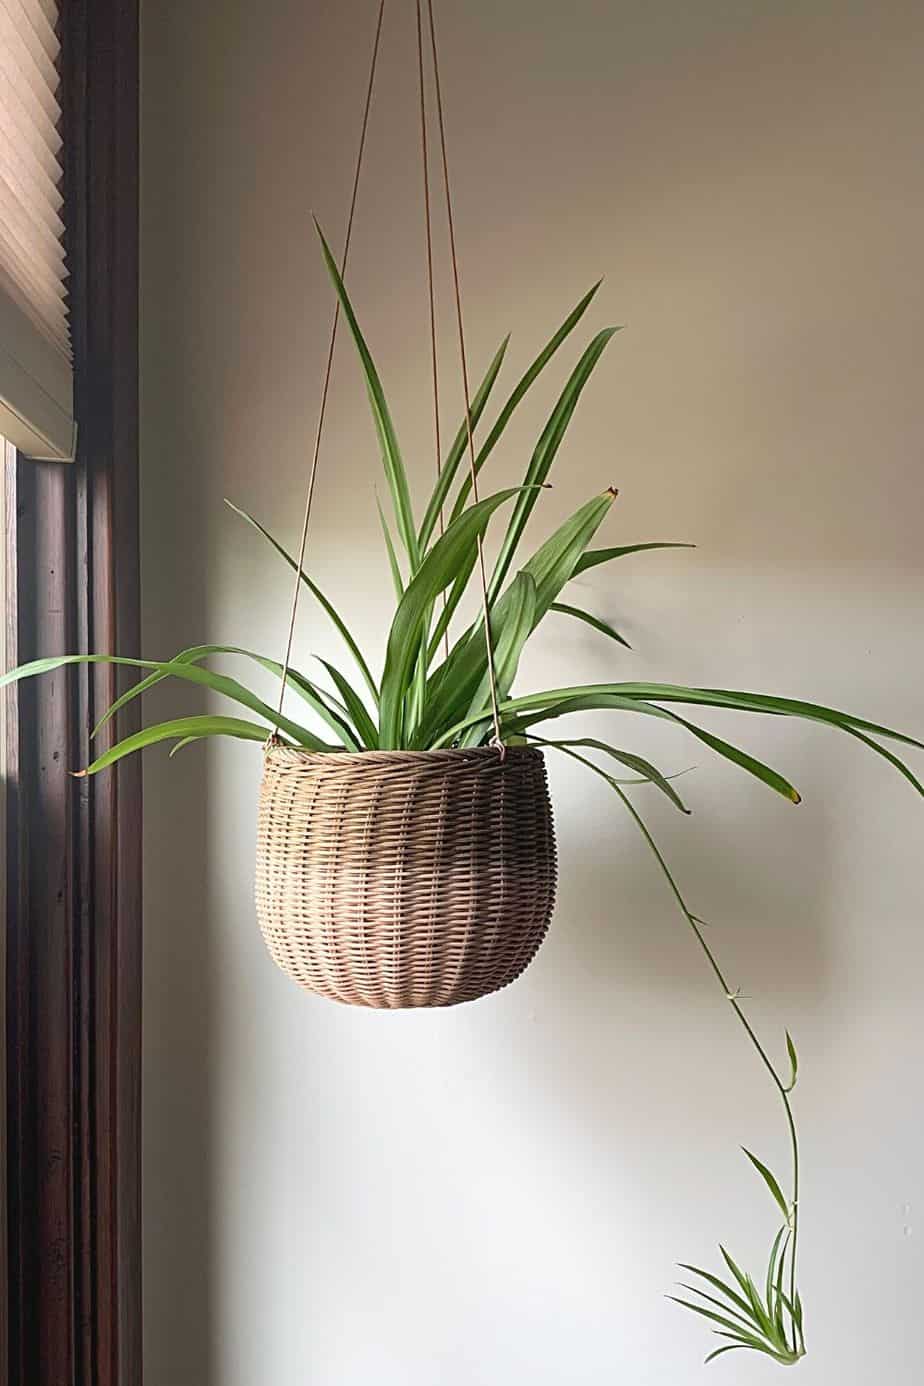 Grow your Spider Plant in a hanging basket if you have cats at home as its toxic for them